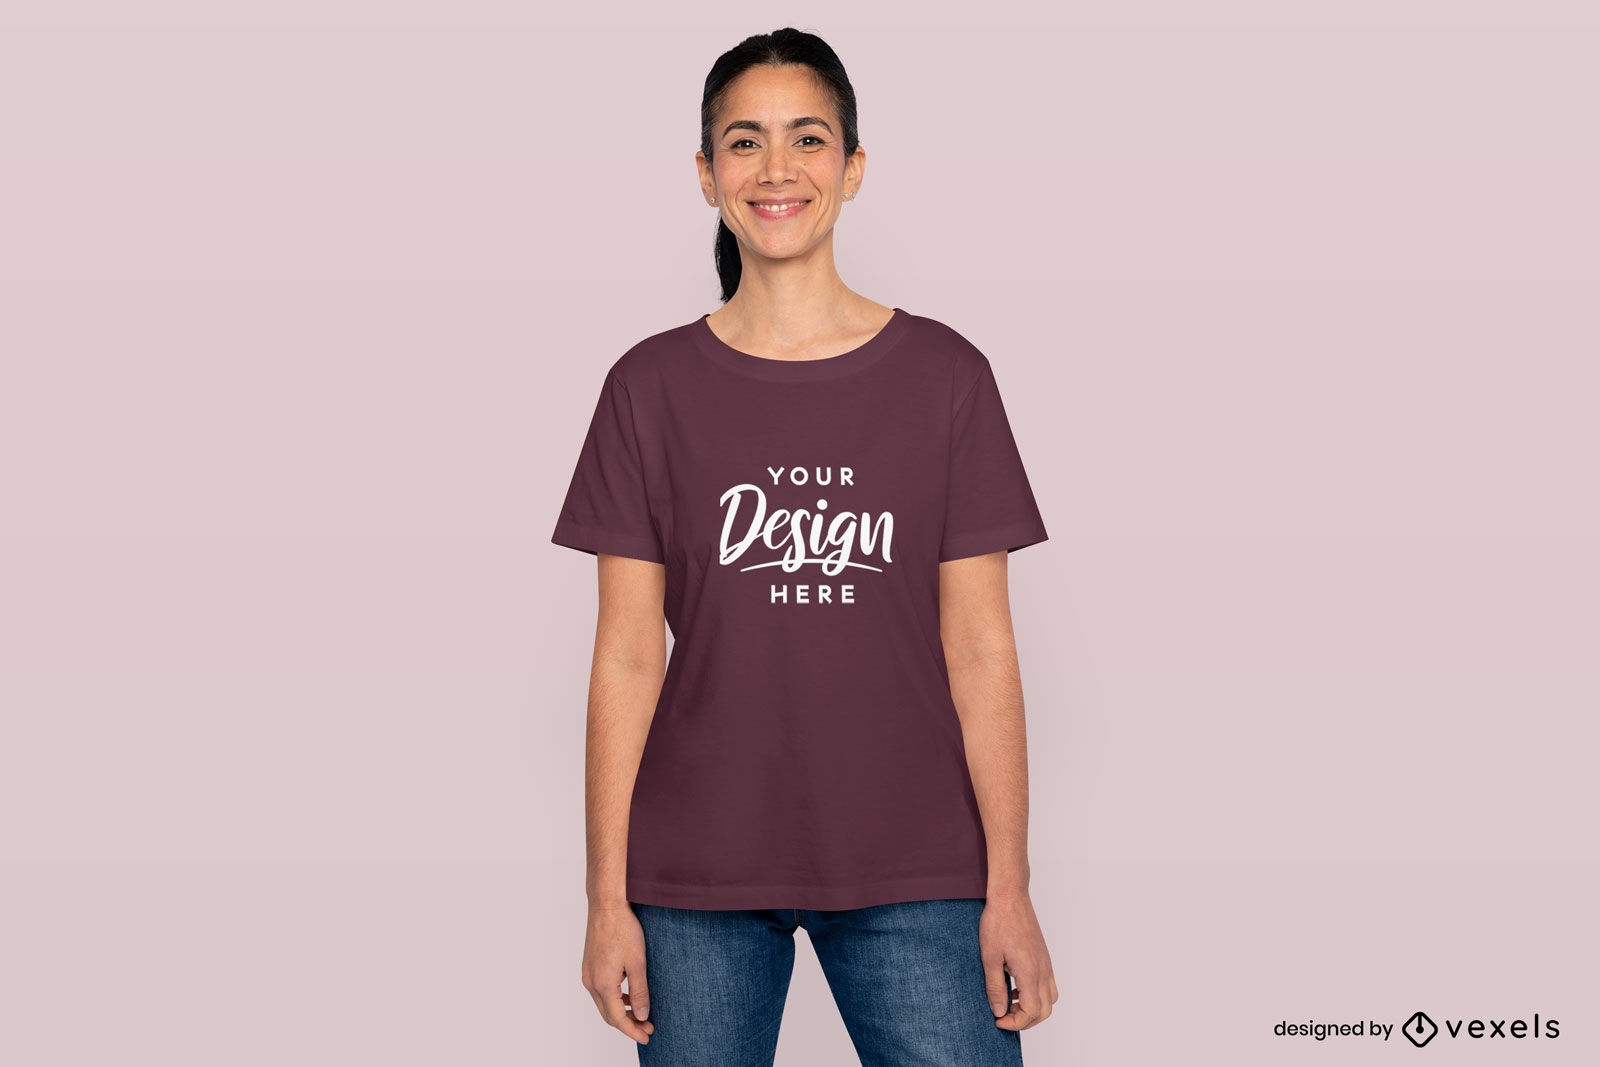 Woman smiling wearing jeand and t-shirt mockup